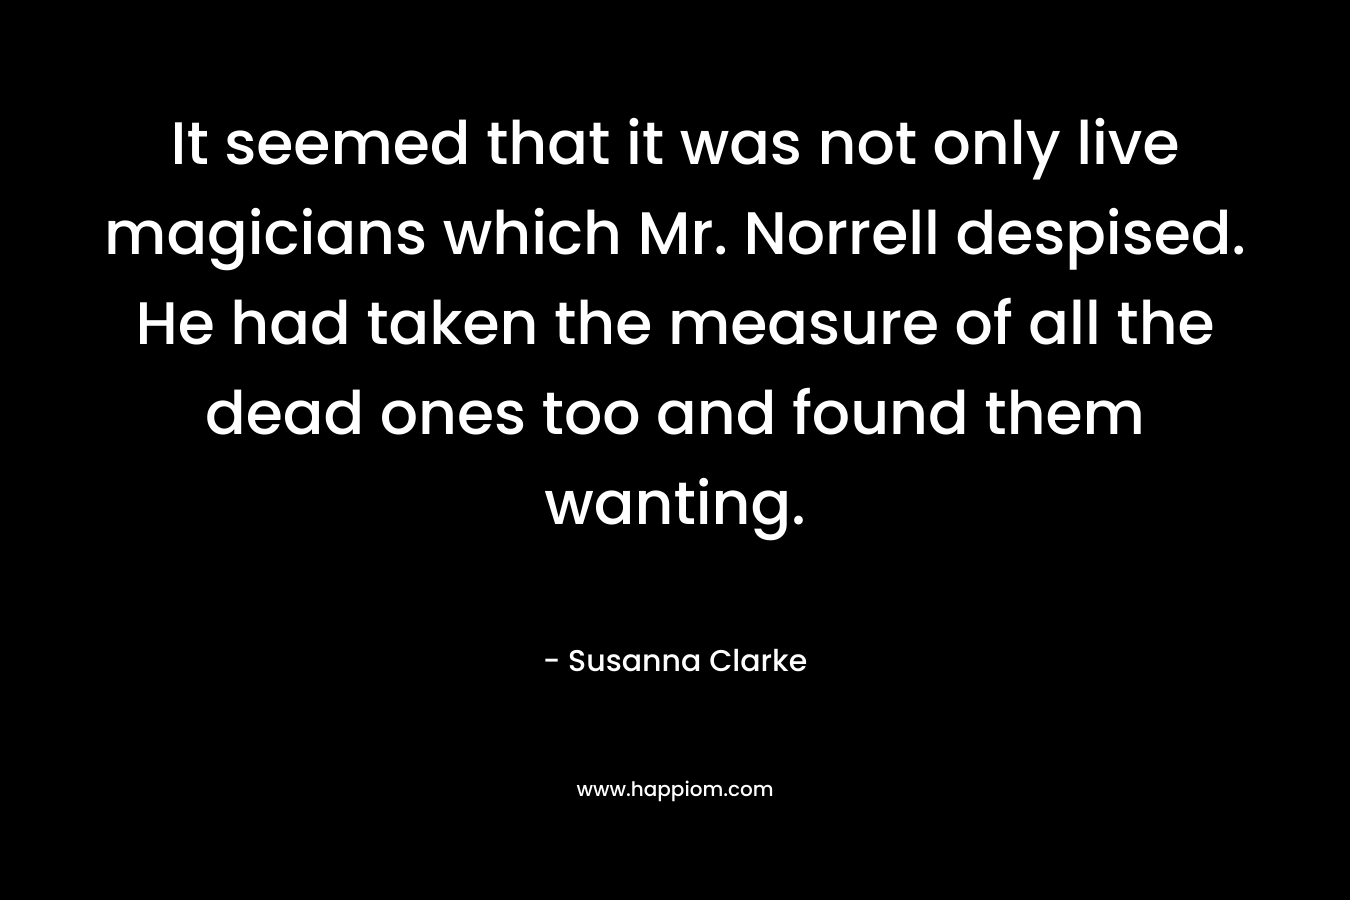 It seemed that it was not only live magicians which Mr. Norrell despised. He had taken the measure of all the dead ones too and found them wanting. – Susanna Clarke